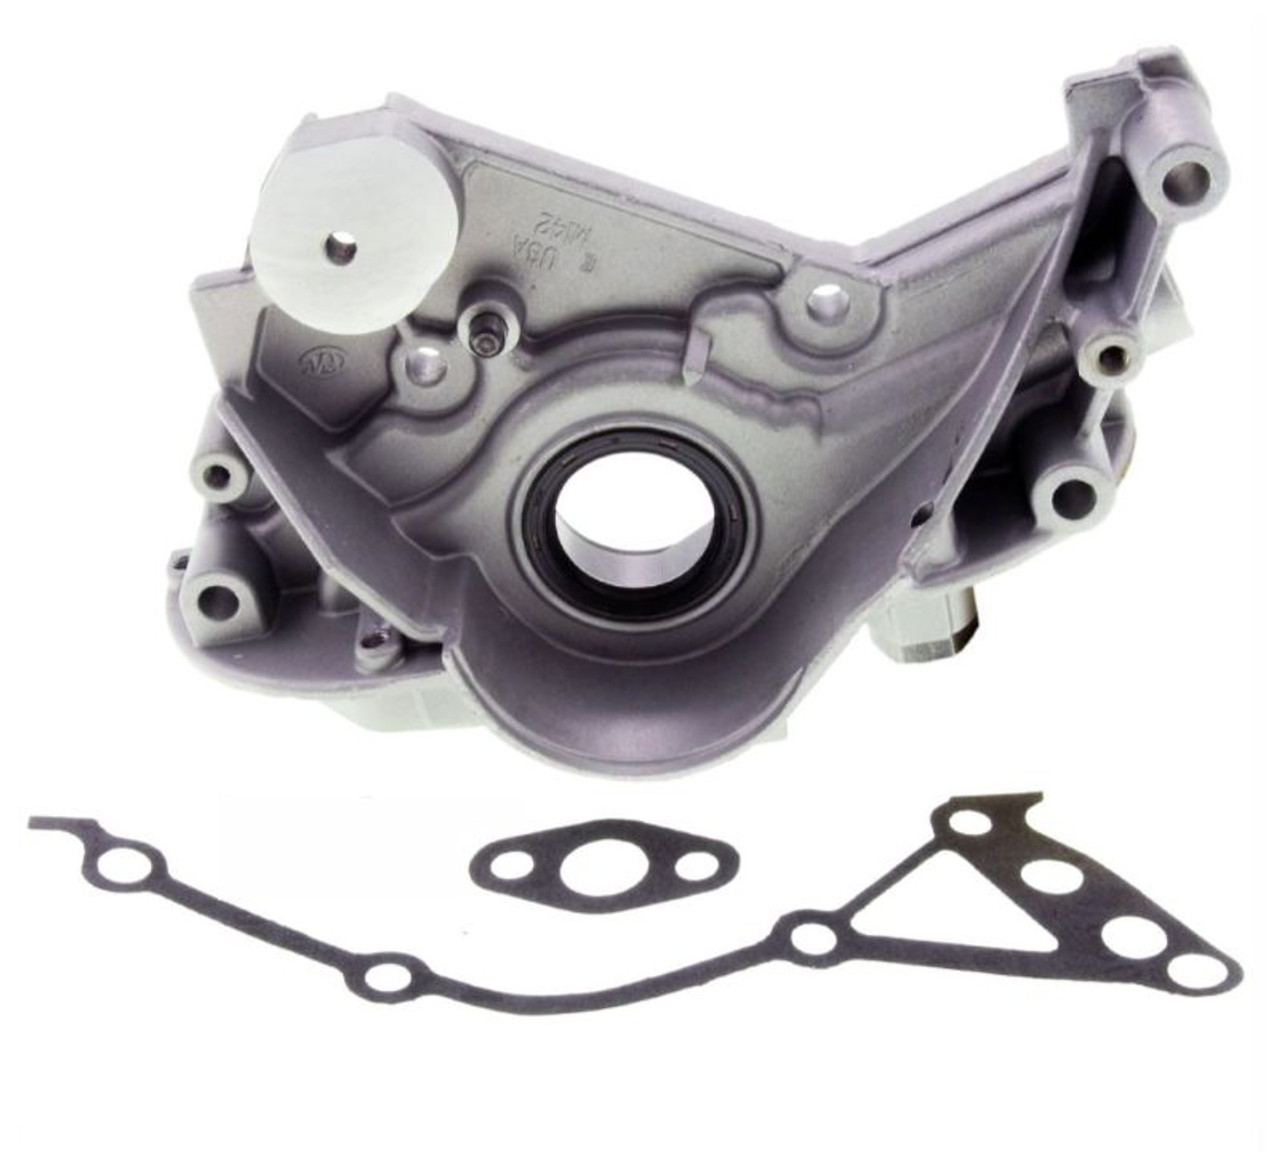 Oil Pump - 1998 Plymouth Grand Voyager 3.0L (EP142.I87)